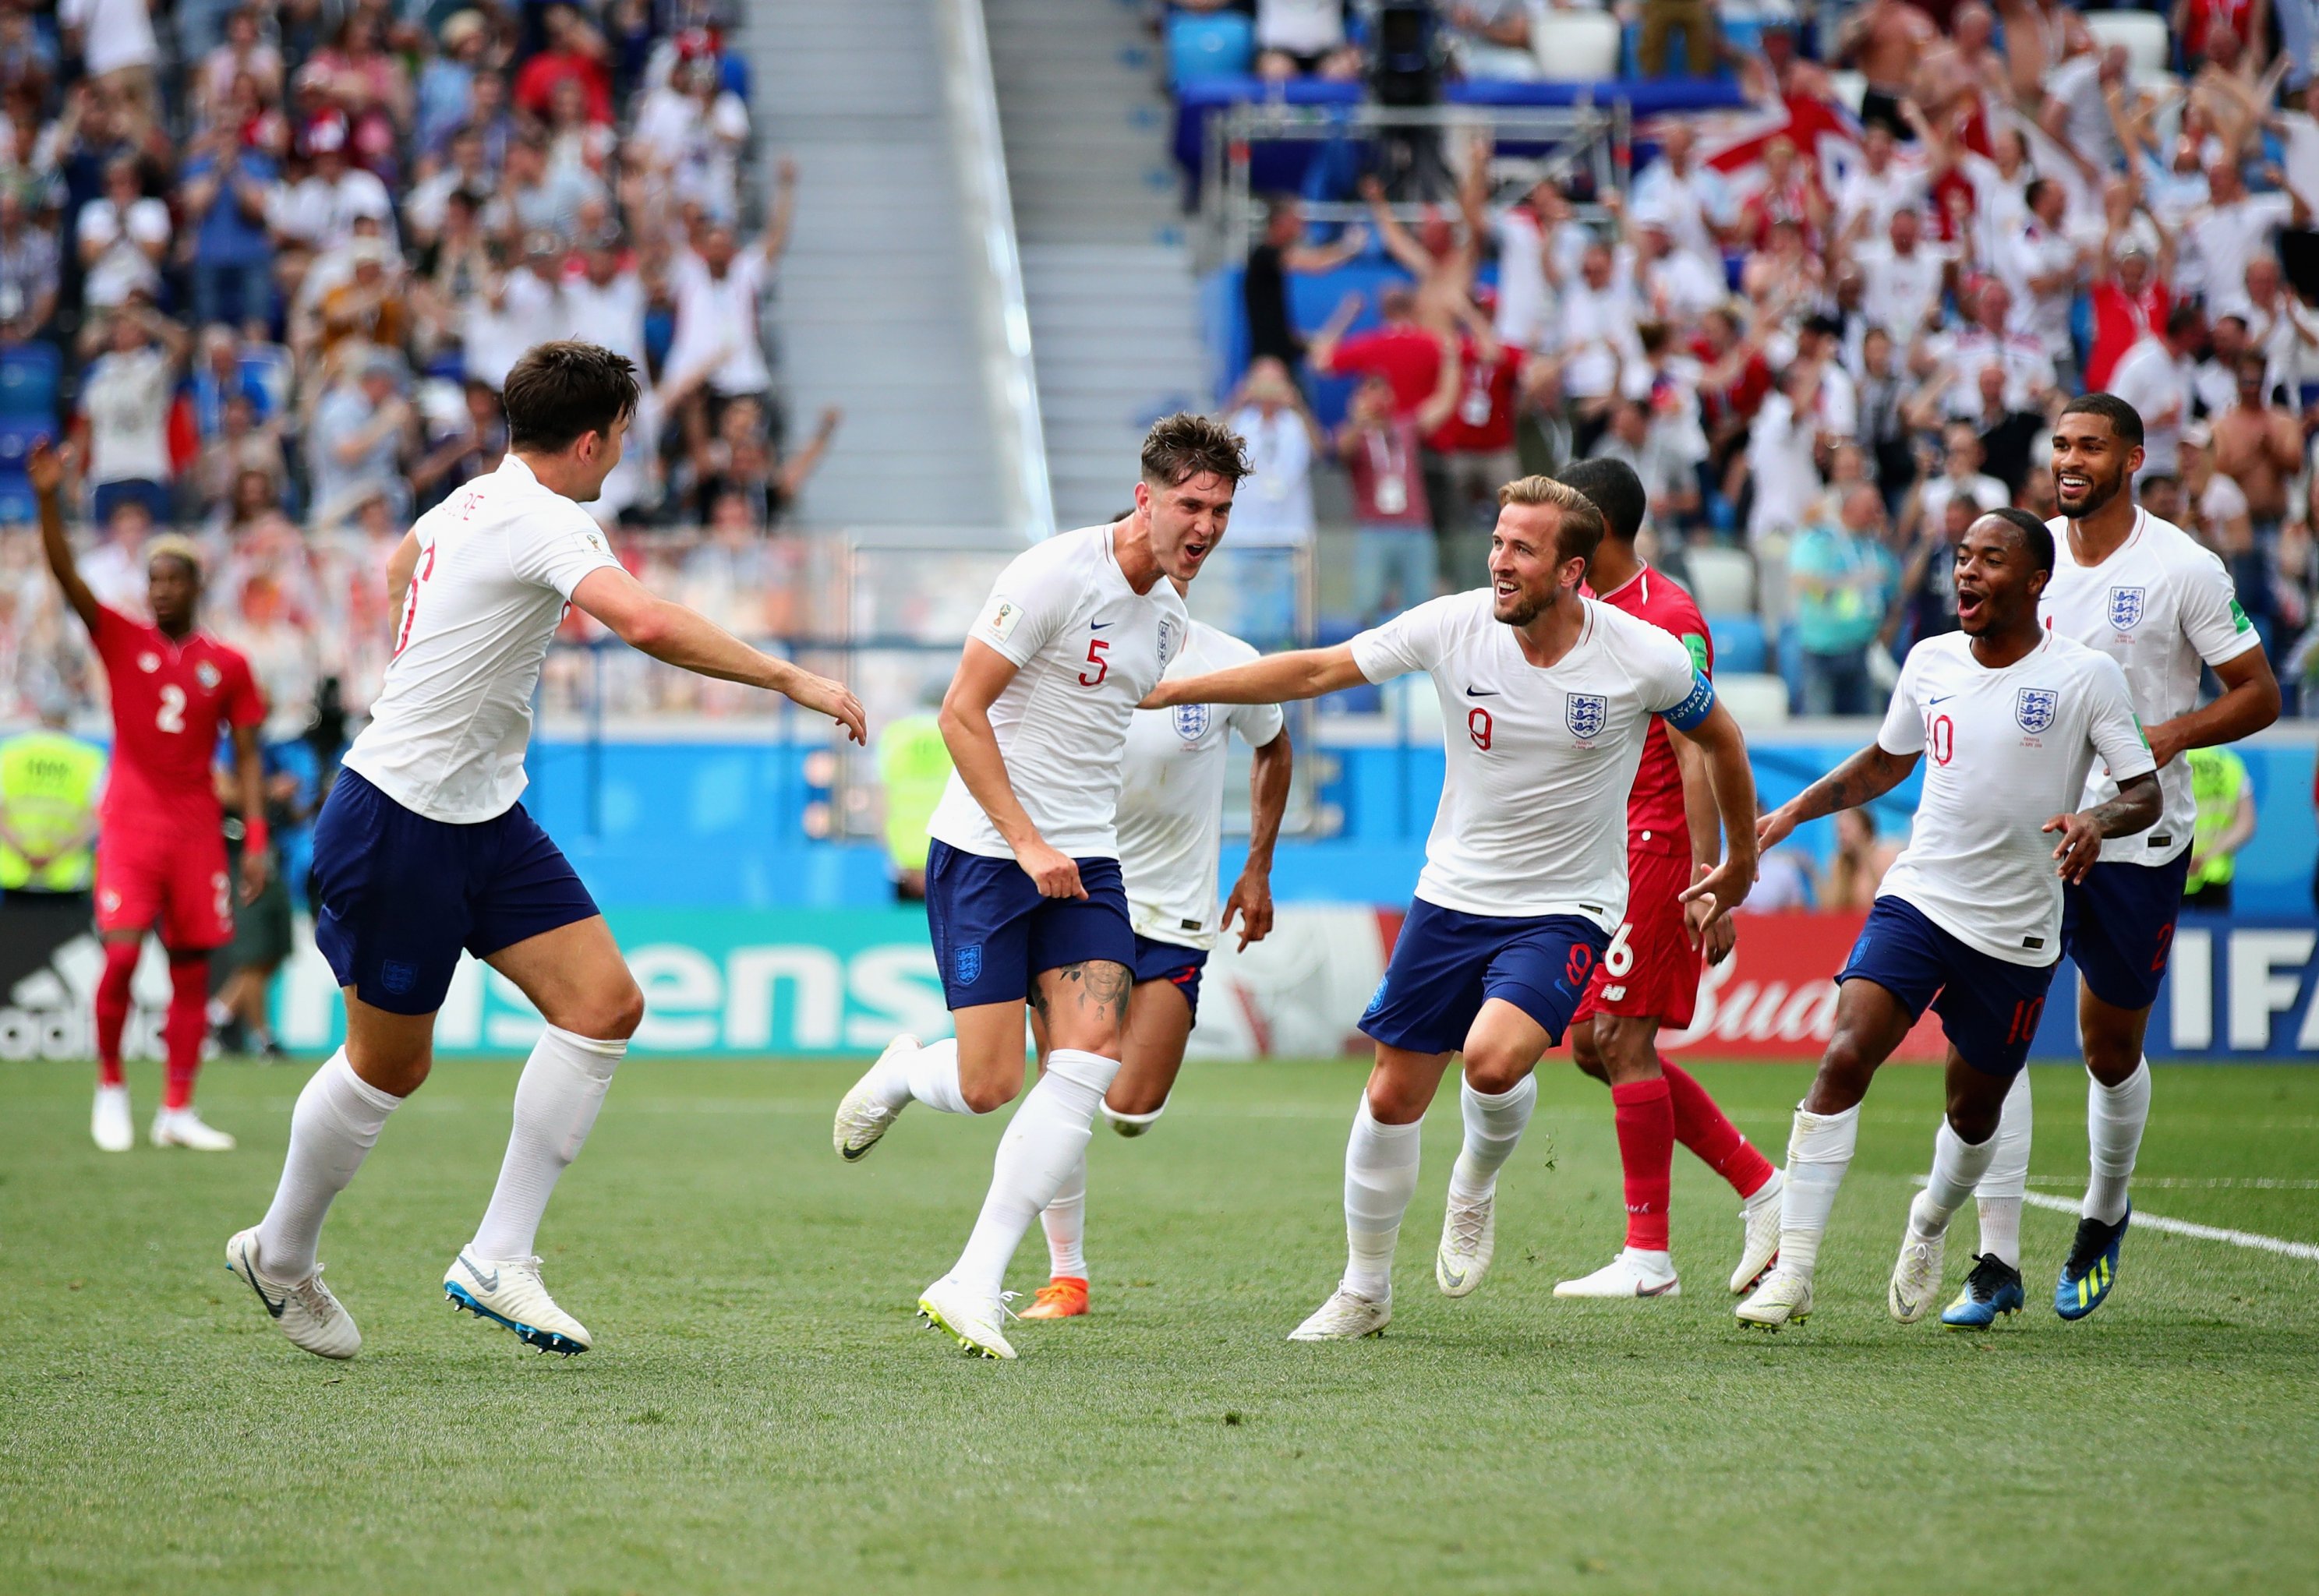 Harry Kane S Hat Trick Fuels England S Dominant Win Vs Panama At World Cup News Scores Highlights Stats And Rumors Bleacher Report